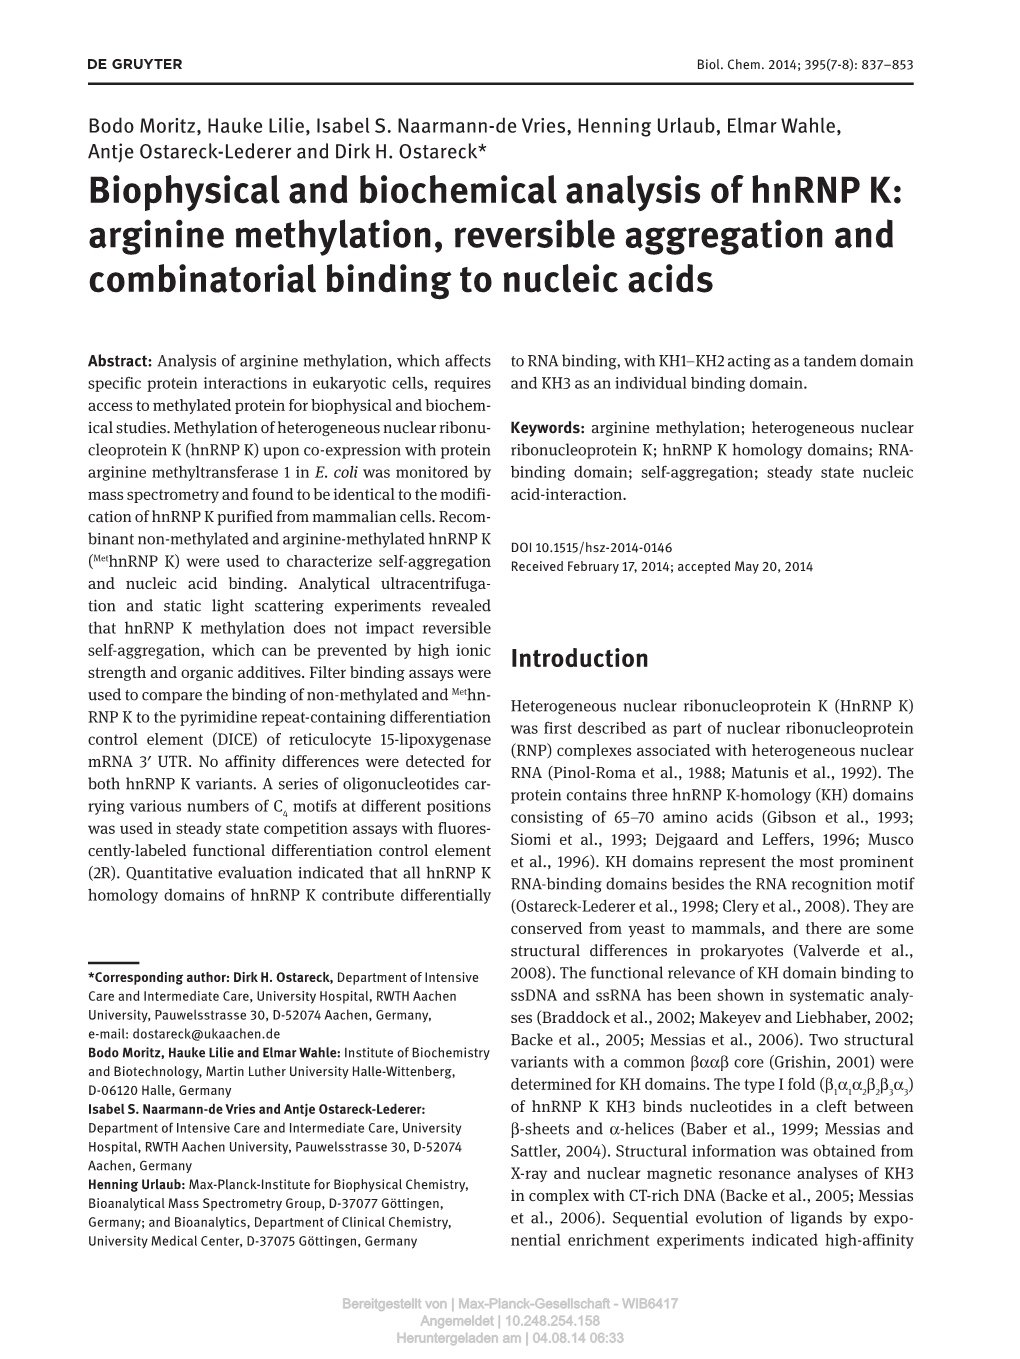 Biophysical and Biochemical Analysis of Hnrnp K: Arginine Methylation, Reversible Aggregation and Combinatorial Binding to Nucleic Acids